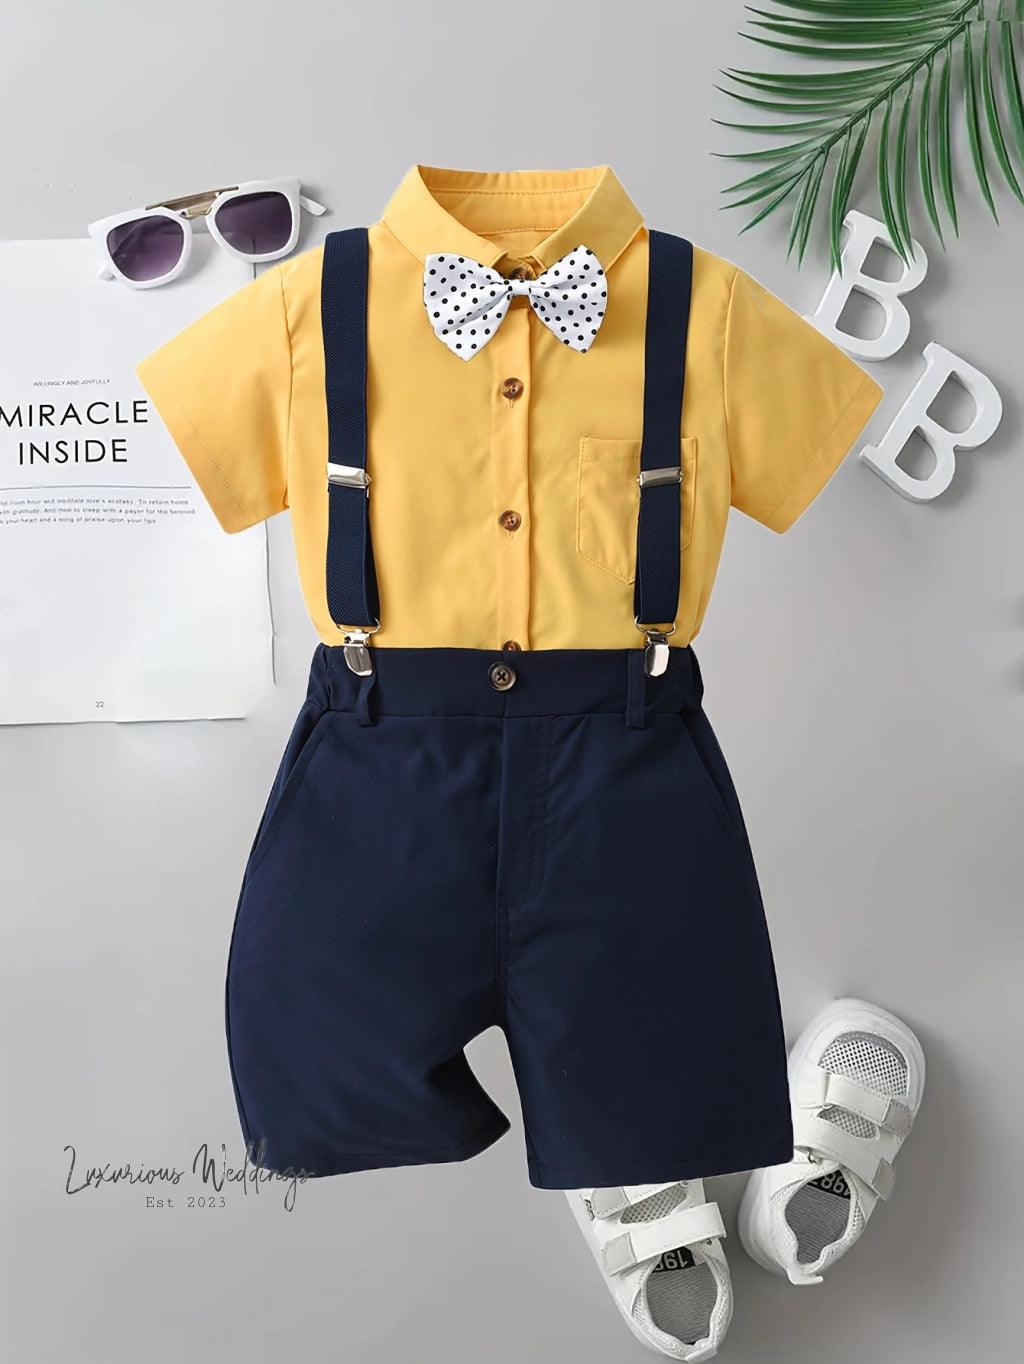 Boys Formal Outfit Set - Shirt, Bowtie, Pants, and Suspenders - Perfect for Weddings and Special Occasions - Luxurious Weddings